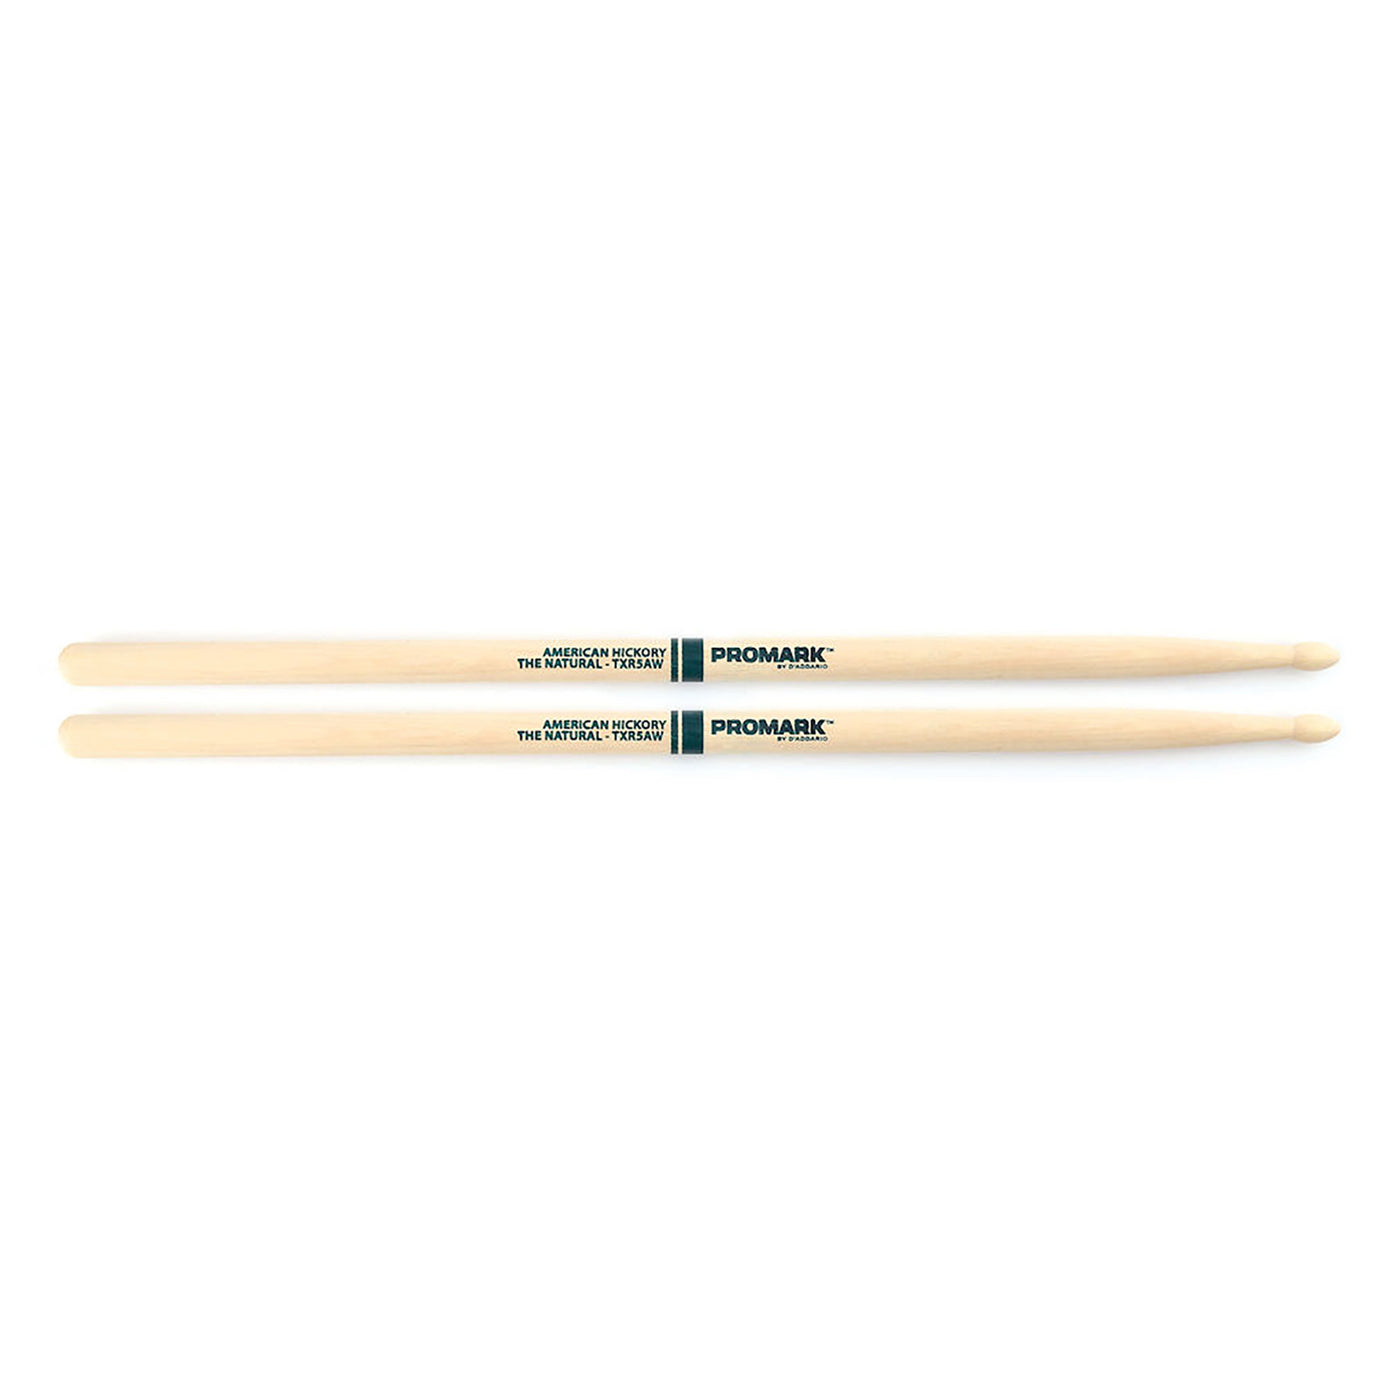 Promark Hickory 5A "The Natural" Wood Tip drumstick